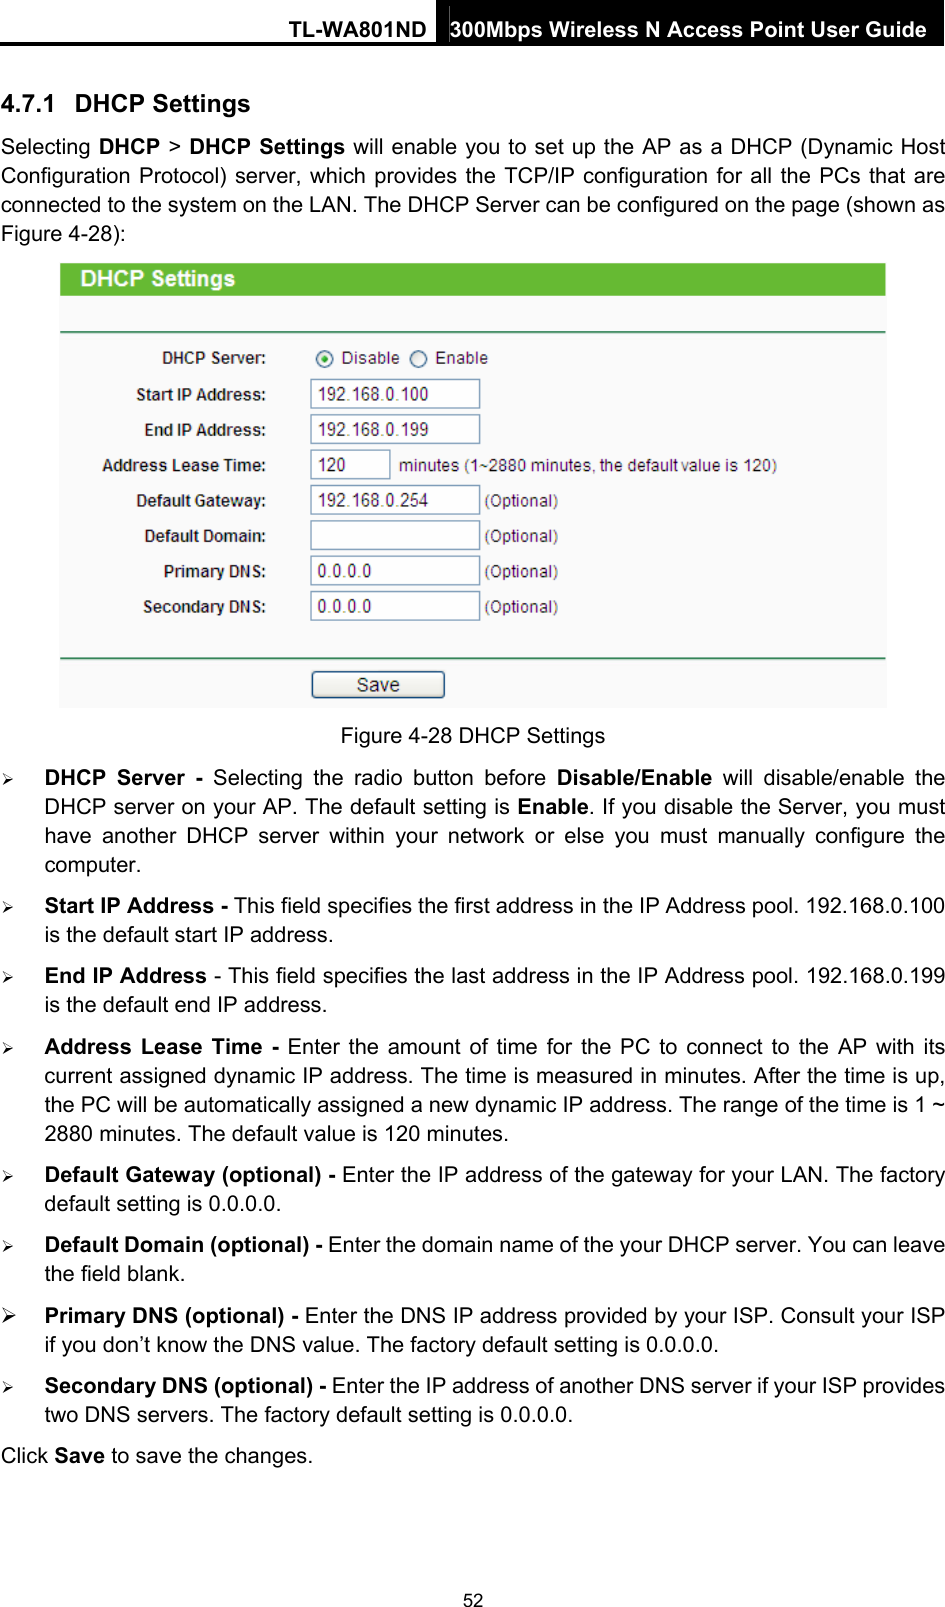 TL-WA801ND 300Mbps Wireless N Access Point User Guide 4.7.1  DHCP Settings Selecting DHCP &gt; DHCP Settings will enable you to set up the AP as a DHCP (Dynamic Host Configuration Protocol) server, which provides the TCP/IP configuration for all the PCs that are connected to the system on the LAN. The DHCP Server can be configured on the page (shown as Figure 4-28):  Figure 4-28 DHCP Settings  DHCP Server - Selecting the radio button before Disable/Enable will disable/enable the DHCP server on your AP. The default setting is Enable. If you disable the Server, you must have another DHCP server within your network or else you must manually configure the computer.  Start IP Address - This field specifies the first address in the IP Address pool. 192.168.0.100 is the default start IP address.    End IP Address - This field specifies the last address in the IP Address pool. 192.168.0.199 is the default end IP address.    Address Lease Time - Enter the amount of time for the PC to connect to the AP with its current assigned dynamic IP address. The time is measured in minutes. After the time is up, the PC will be automatically assigned a new dynamic IP address. The range of the time is 1 ~ 2880 minutes. The default value is 120 minutes.  Default Gateway (optional) - Enter the IP address of the gateway for your LAN. The factory default setting is 0.0.0.0.  Default Domain (optional) - Enter the domain name of the your DHCP server. You can leave the field blank.  Primary DNS (optional) - Enter the DNS IP address provided by your ISP. Consult your ISP if you don’t know the DNS value. The factory default setting is 0.0.0.0.  Secondary DNS (optional) - Enter the IP address of another DNS server if your ISP provides two DNS servers. The factory default setting is 0.0.0.0. Click Save to save the changes. 52 